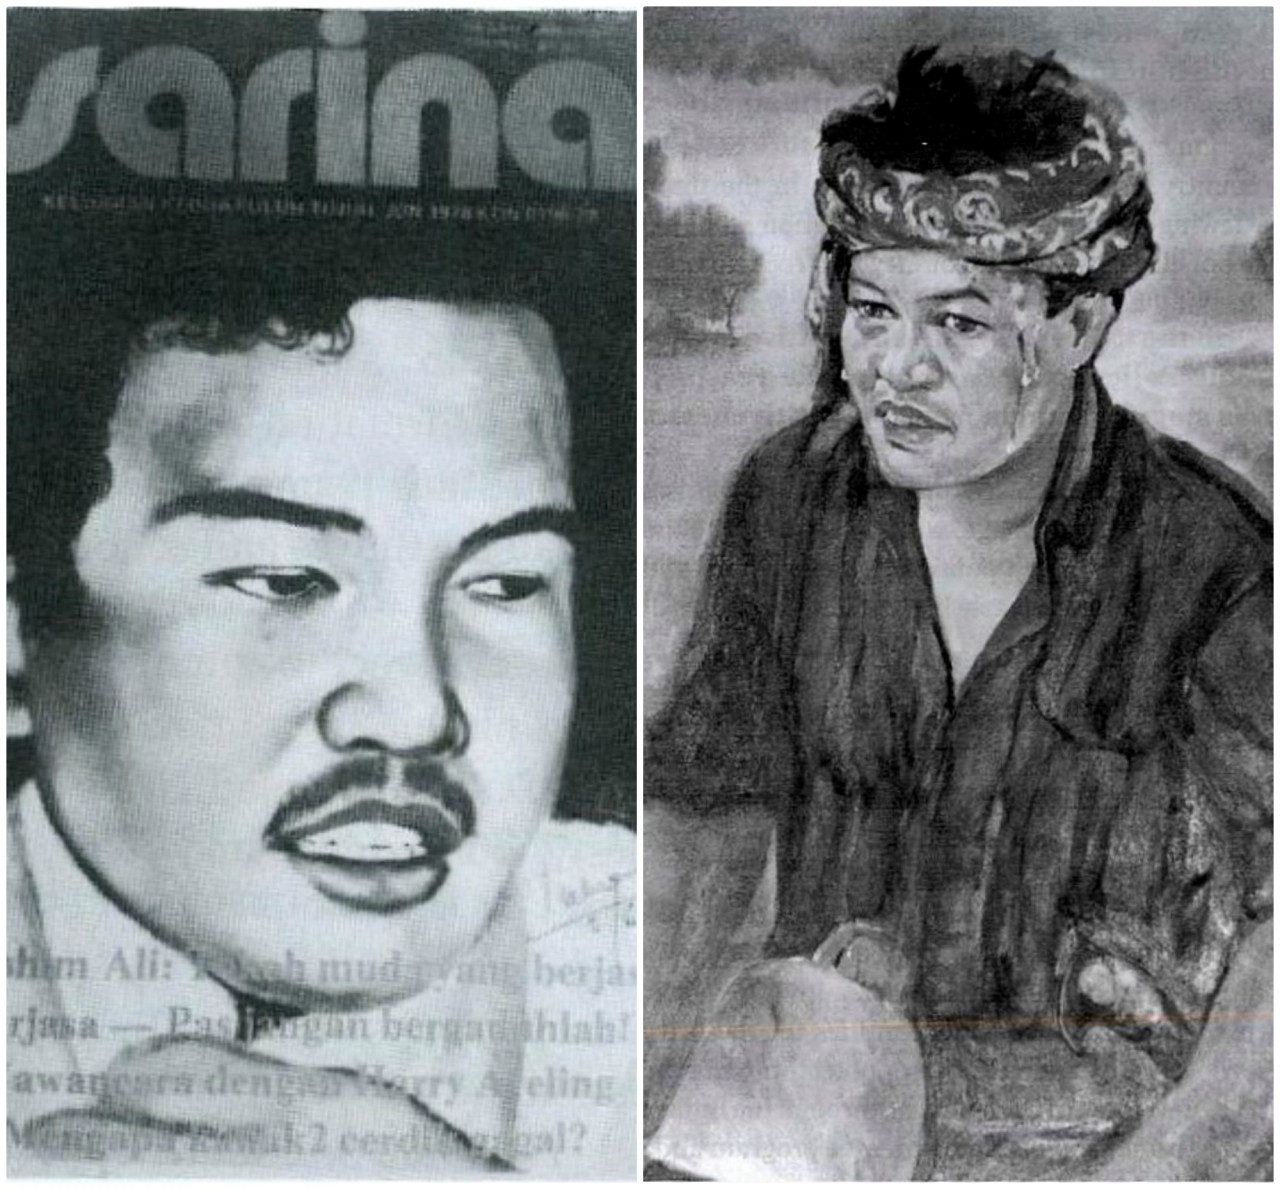 (Left) 'Sarina' magazine in 1978 declared Tok Him ‘Tokoh Muda Yang Berjasa’ (a meritorious young leader). An illustration of Tok Him. – Pic courtesy of 'The Misunderstood Man: An Untold Story' by Ibrahim Ali